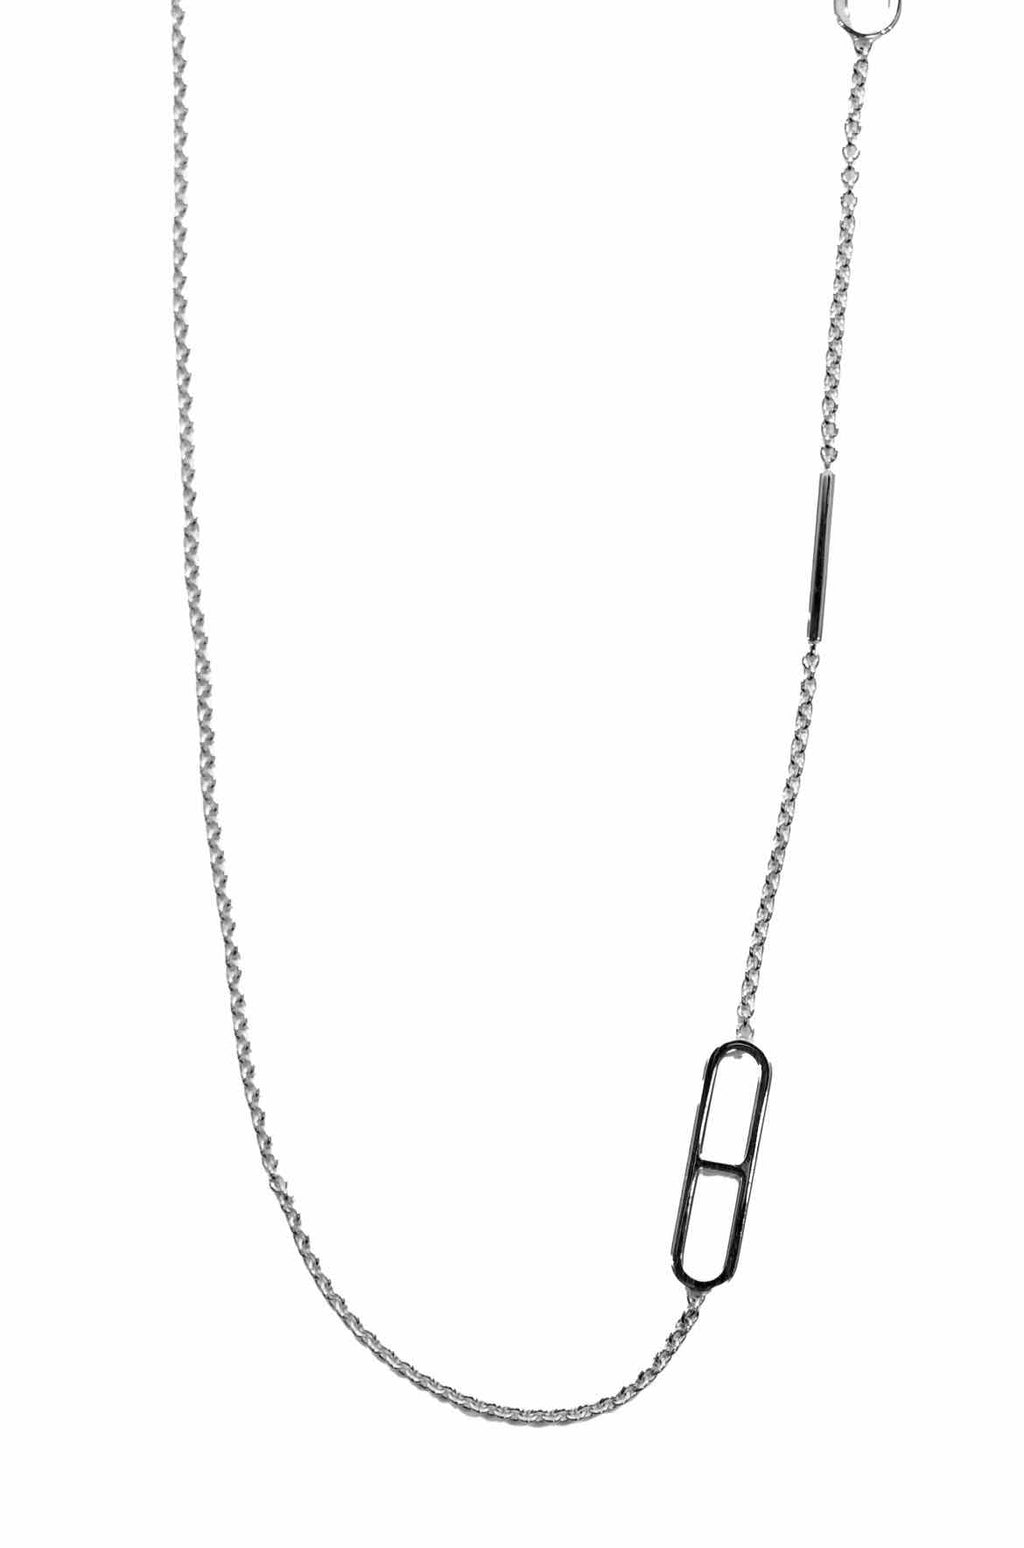 Tioneer Stainless Steel Caduceus Staff of Hermes Engraved Dog Tag Pendant  Necklace - Walmart.com